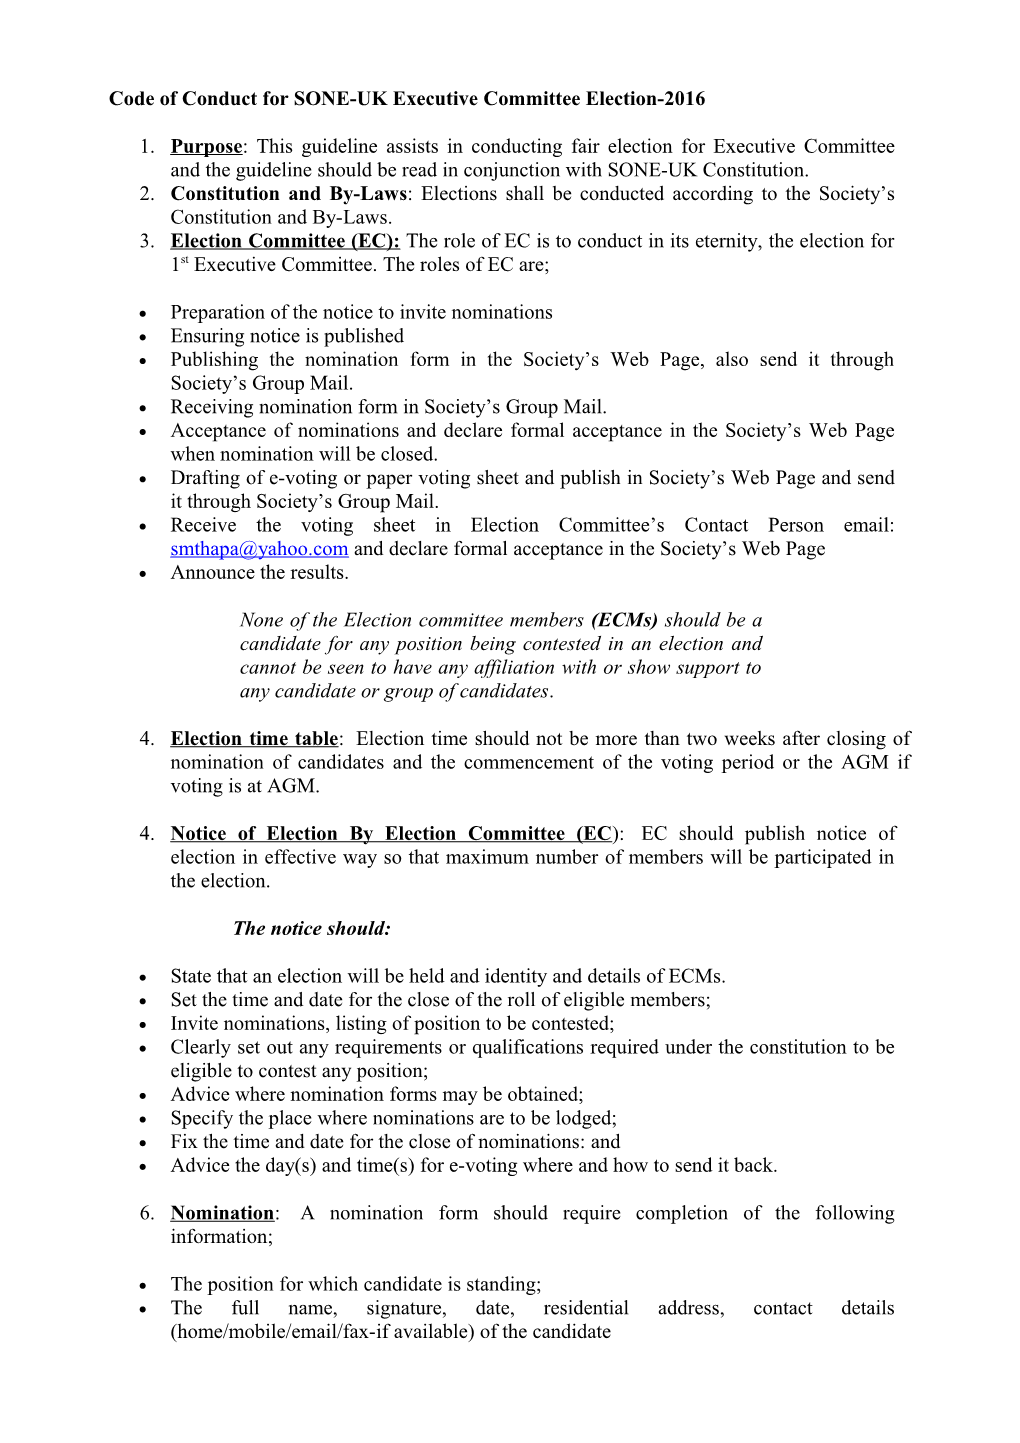 Code of Conduct for SNHSM Executive Committee Election-2012